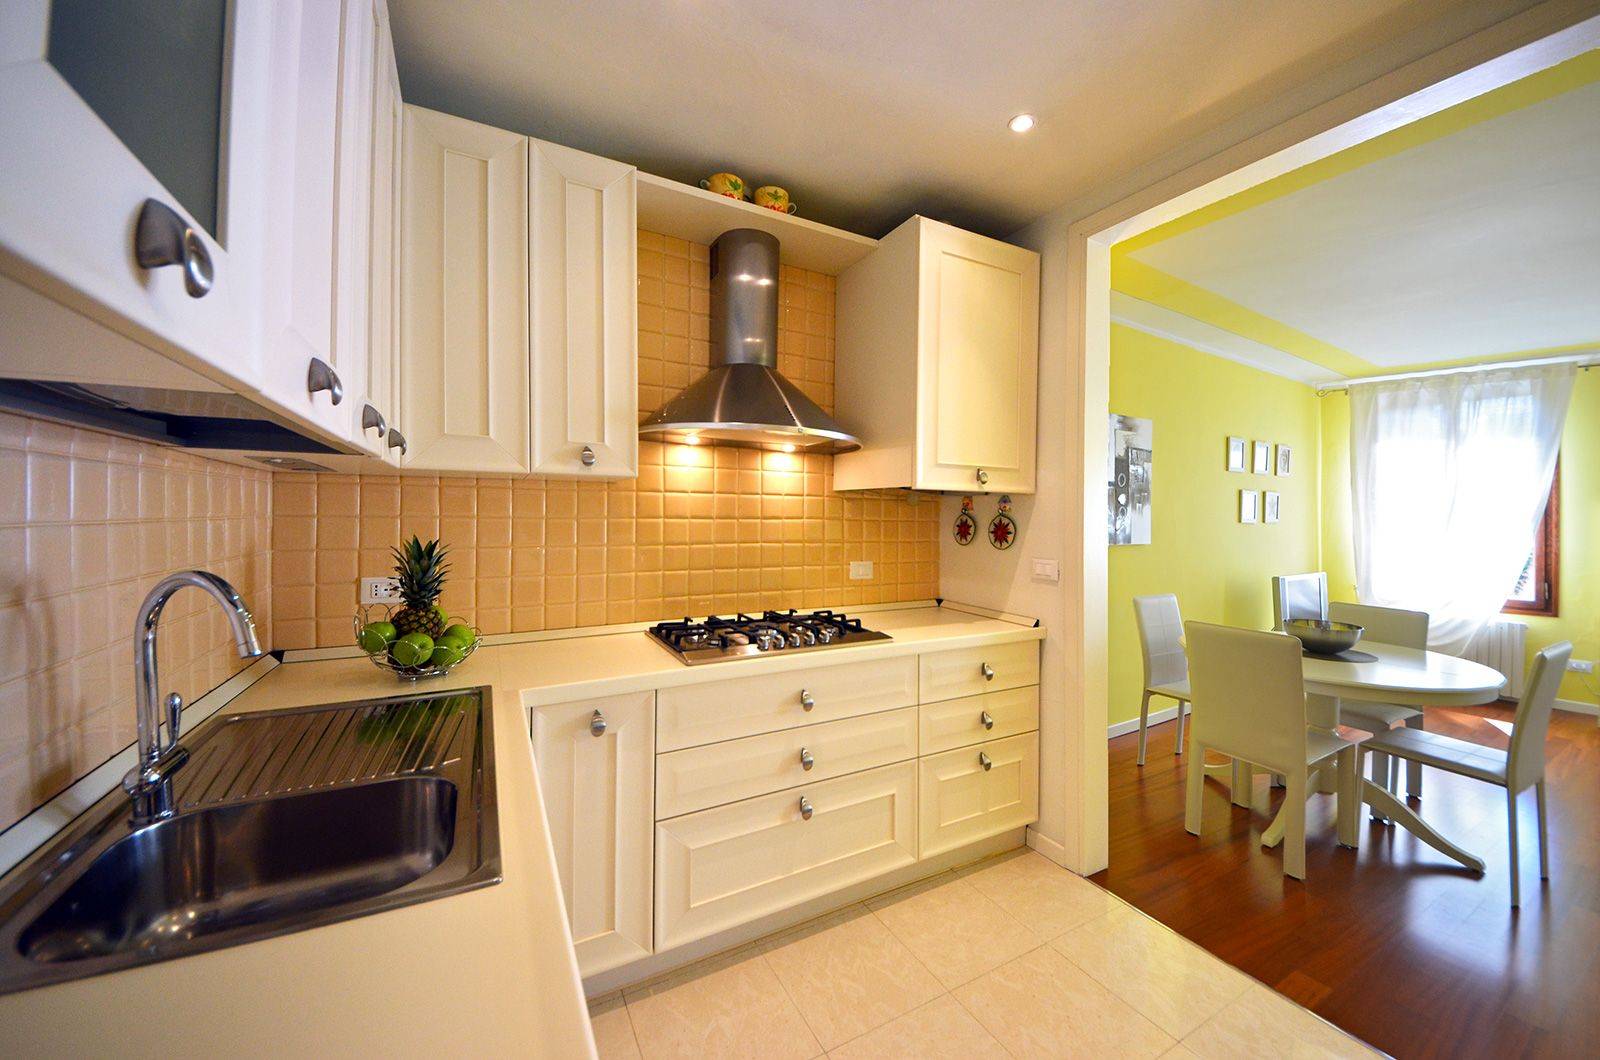 full optionals kitchen, spacious and well equipped